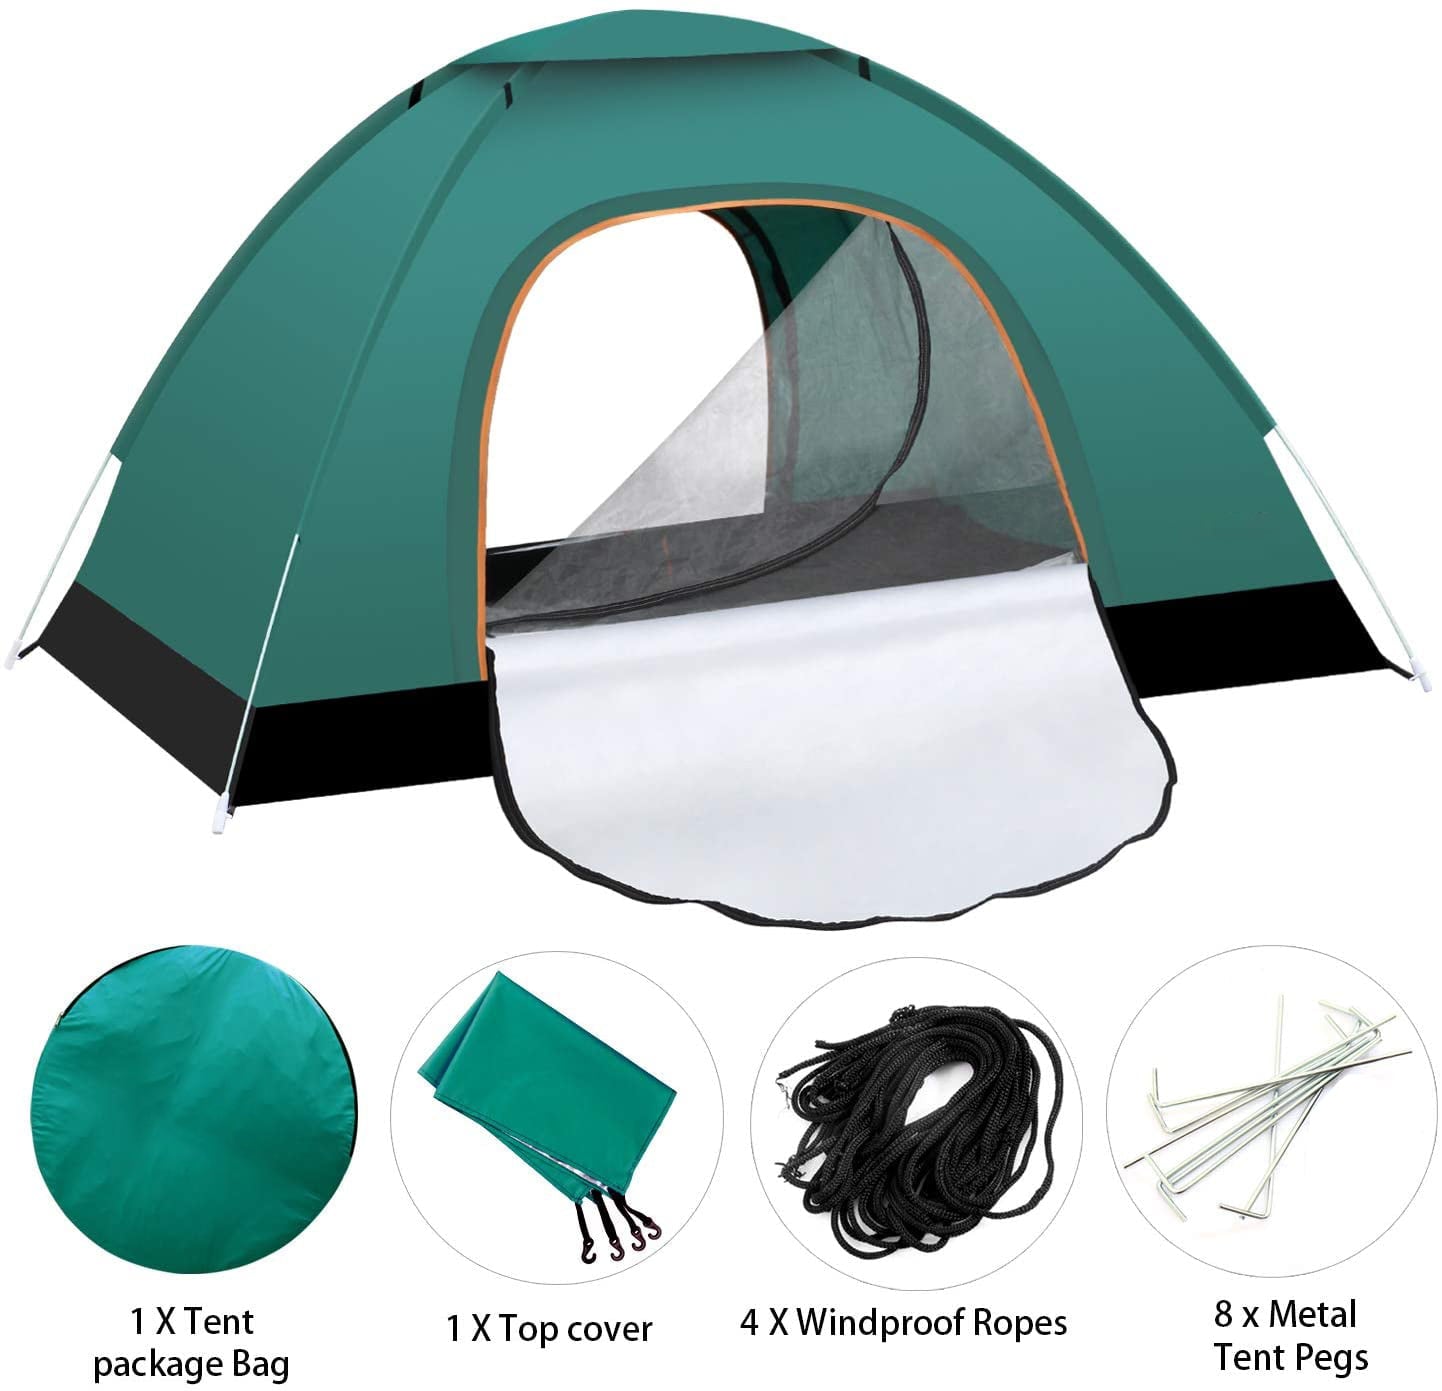 Instant Automatic pop up Camping Tent, 3-4 Persons Lightweight Tent, UV Protection, Perfect for Beach, Outdoor, Traveling, Hiking, Camping, Hunting, Fishing